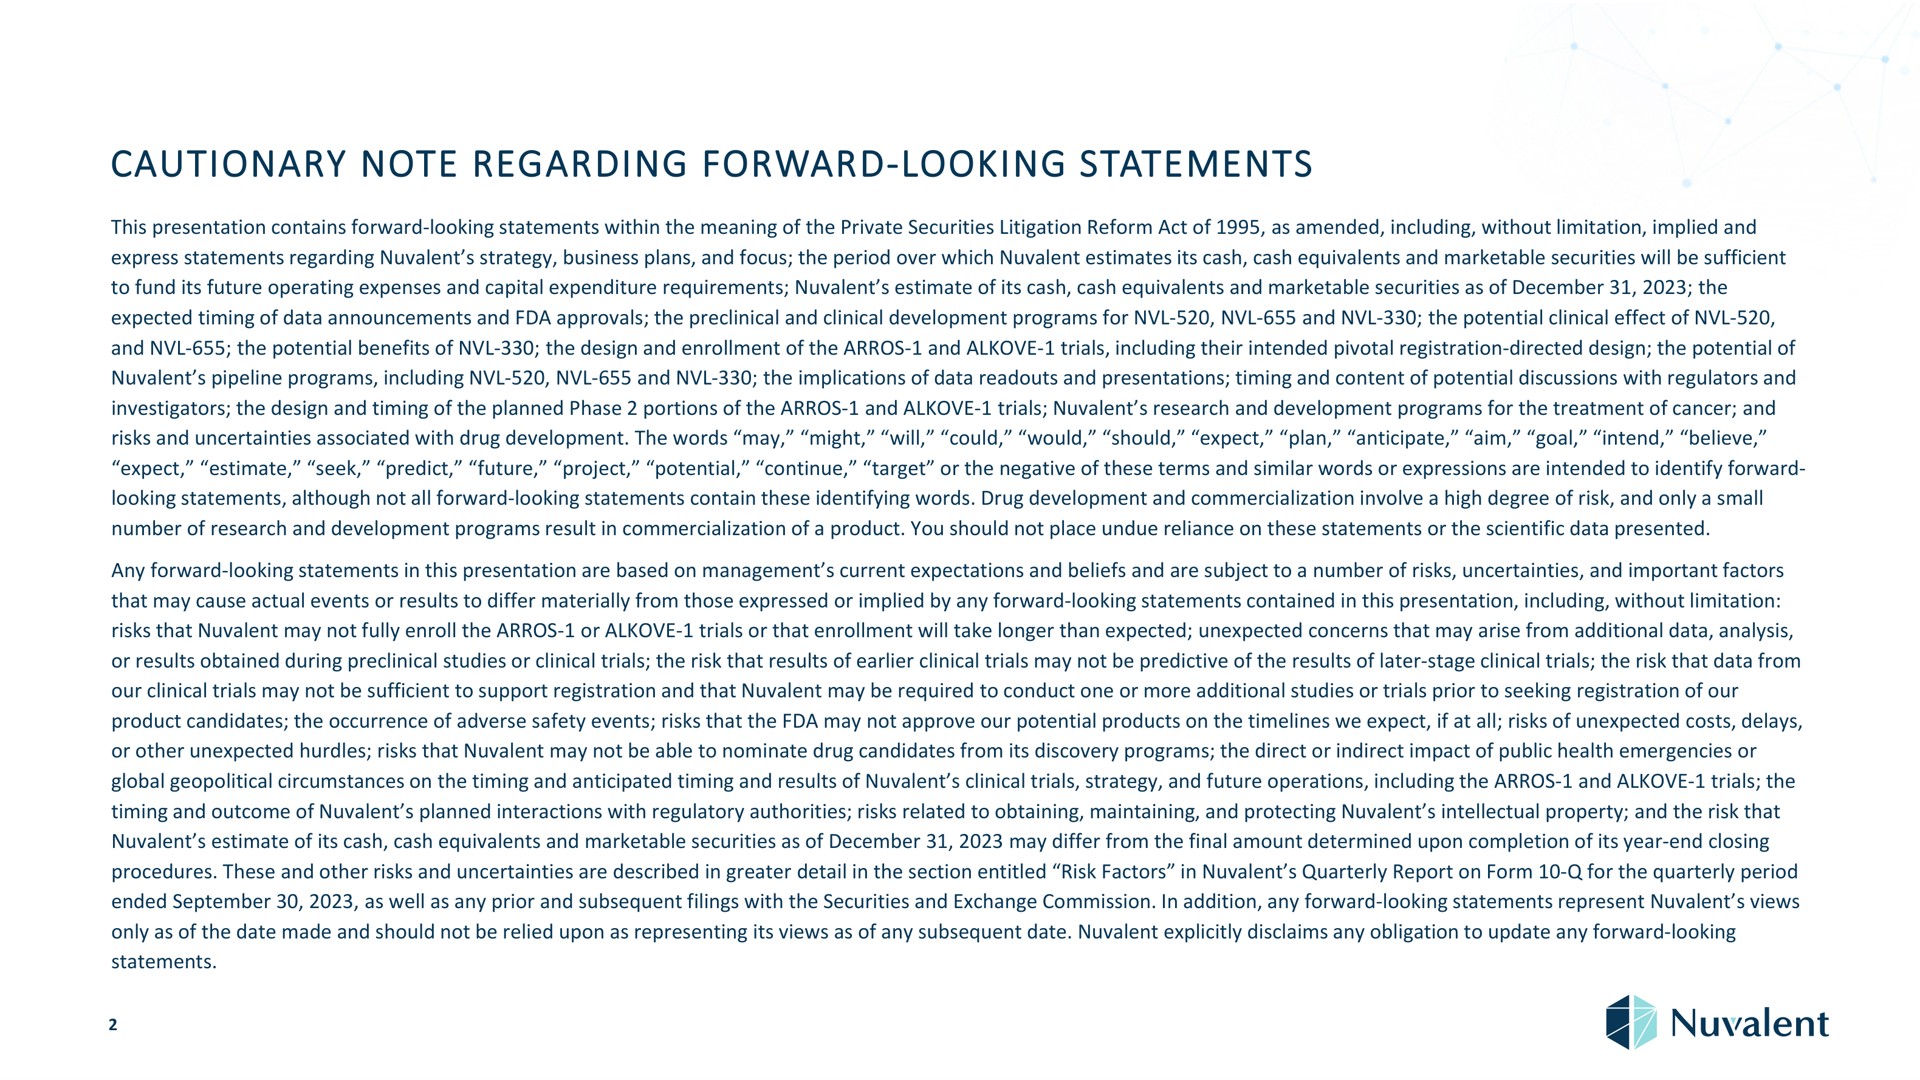 cautionary note regarding forward looking statements this presentation contains forward looking statements within the meaning of the private securities litigation reform act of as amended including without limitation implied and express statements regarding strategy business plans and focus the period over which estimates its cash cash equivalents and marketable securities will be sufficient to fund its future operating expenses and capital expenditure requirements estimate of its cash cash equivalents and marketable securities as of the expected timing of data announcements and approvals the preclinical and clinical development programs for and the potential clinical effect of and the potential benefits of the design and enrollment of the and trials including their intended pivotal registration directed design the potential of pipeline programs including and the implications of data and presentations timing and content of potential discussions with regulators and investigators the design and timing of the planned phase portions of the and trials research and development programs for the treatment of cancer and could would should expect plan anticipate aim goa intend believe risks and uncertainties associated with drug development the words may might will expect estimate seek predict future project i continue target or the negative of these terms and similar words or expressions are intended to identify forward looking statements although not all forward looking statements contain these identifying words drug development and commercialization involve a high degree of risk and only a small number of research and development programs result in commercialization of a product you should not place undue reliance on these statements or the scientific data presented any forward looking statements in this presentation are based on management current expectations and beliefs and are subject to a number of risks uncertainties and important factors that may cause actual events or results to differ materially from those expressed or implied by any forward looking statements contained in this presentation including without limitation risks that may not fully enroll the or trials or that enrollment will take longer than expected unexpected concerns that may arise from additional data analysis or results obtained during preclinical studies or clinical trials the risk that results of clinical trials may not be predictive of the results of later stage clinical trials the risk that data from our clinical trials may not be sufficient to support registration and that may be required to conduct one or more additional studies or trials prior to seeking registration of our product candidates the occurrence of adverse safety events risks that the may not approve our potential products on the we expect if at all risks of unexpected costs delays or other unexpected hurdles risks that may not be able to nominate drug candidates from its discovery programs the direct or indirect impact of public health emergencies or global geopolitical circumstances on the timing and anticipated timing and results of clinical trials strategy and future operations including the and trials the timing and outcome of planned interactions with regulatory authorities risks related to obtaining maintaining and protecting intellectual property and the risk that estimate of its cash cash equivalents and marketable securities as of may differ from the final amount determined upon completion of its year end closing procedures these and other risks and uncertainties are described in greater detail in the section entitled risk factors in quarterly report on form for the quarterly period ended as well as any prior and subsequent filings with the securities and exchange commission in addition any forward looking statements represent views only as of the date made and should not be relied upon as representing its views as of any subsequent date explicitly disclaims any obligation to update any forward looking statements | Nuvalent